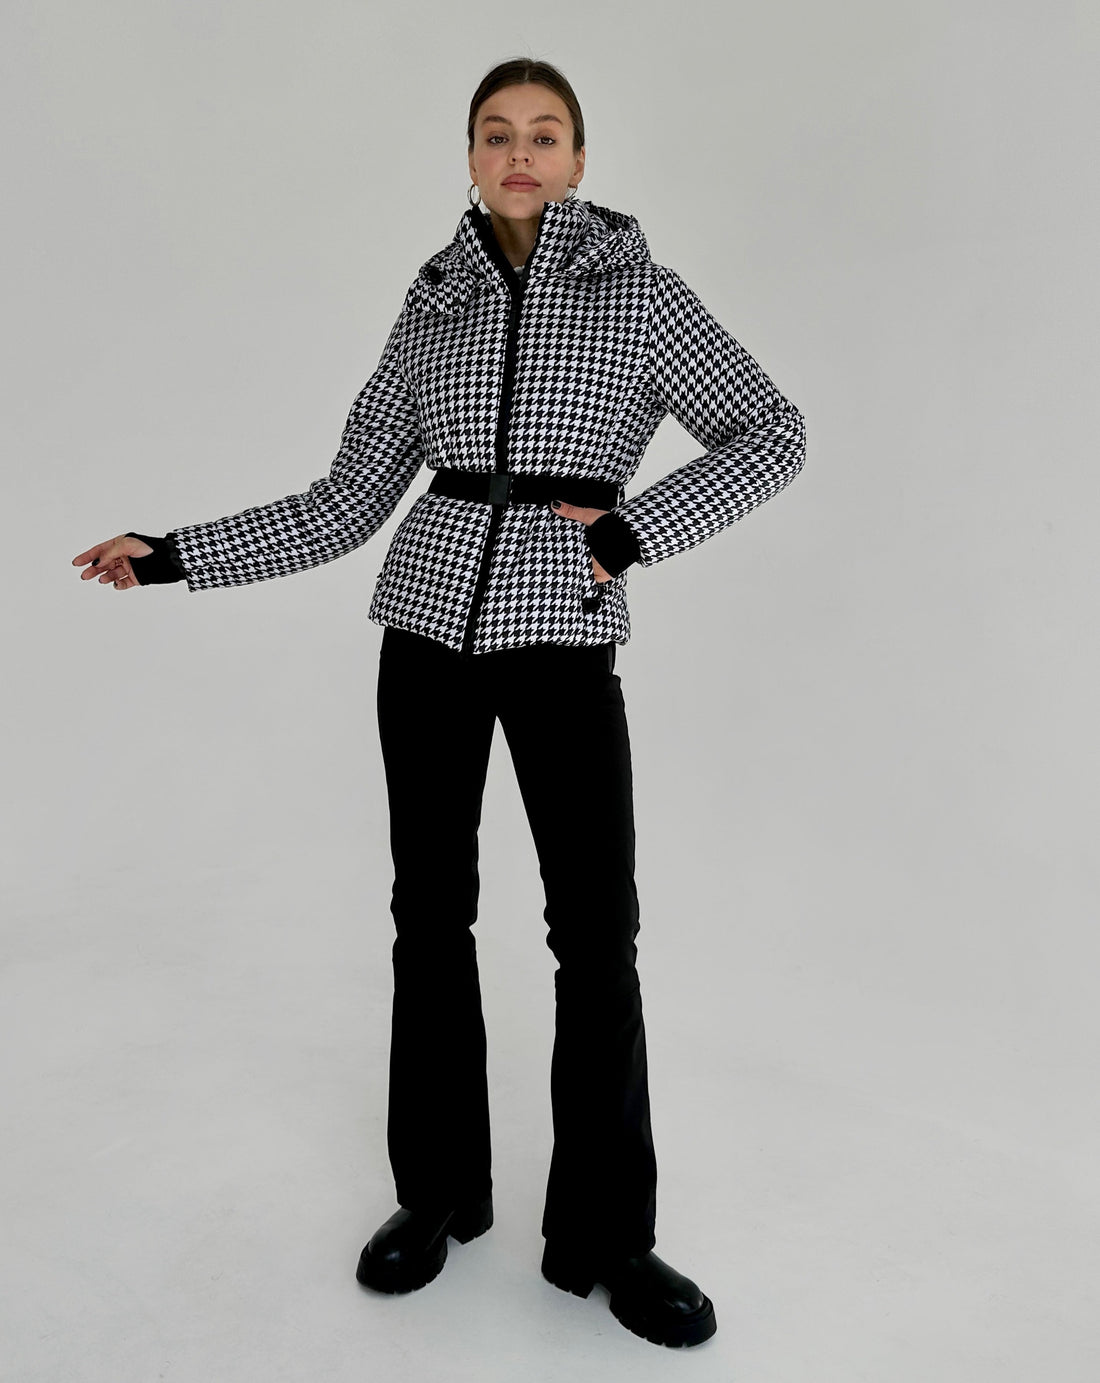 Houndstooth pattern two piece ski outfit - McKinley Houndstooth - Black ski suit